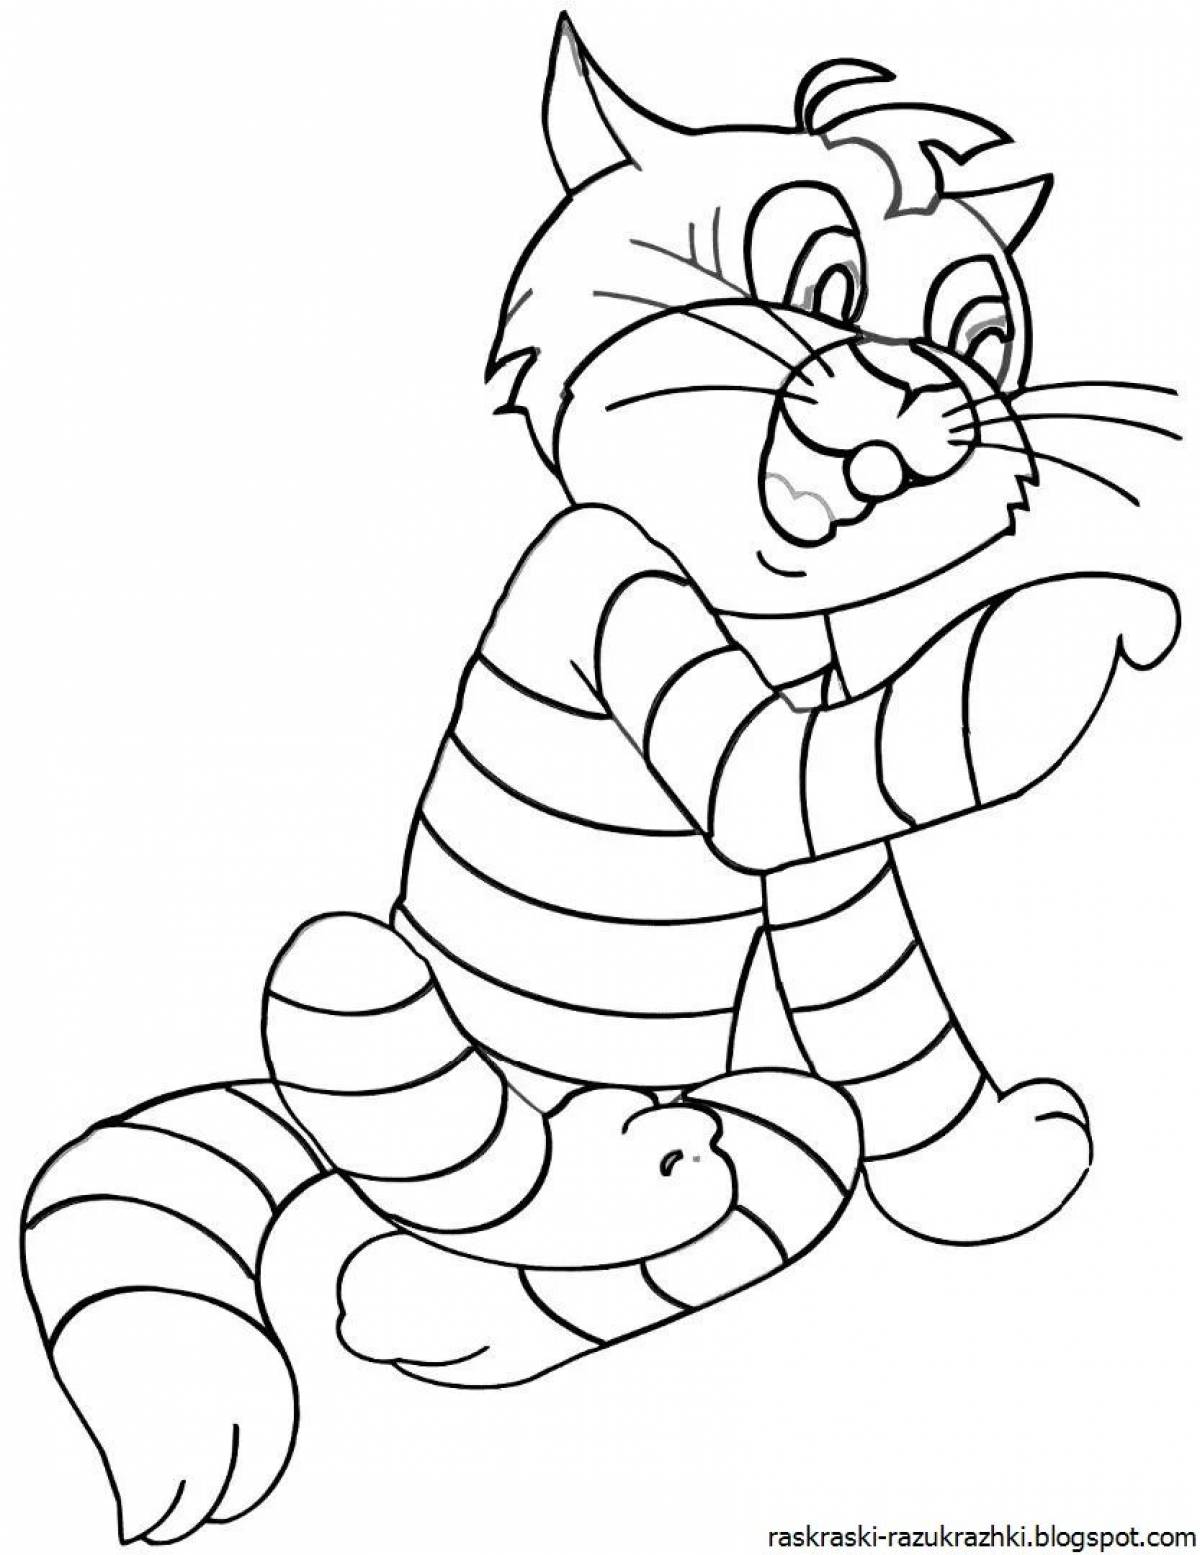 Coloring page of joyful sailor skin for babies